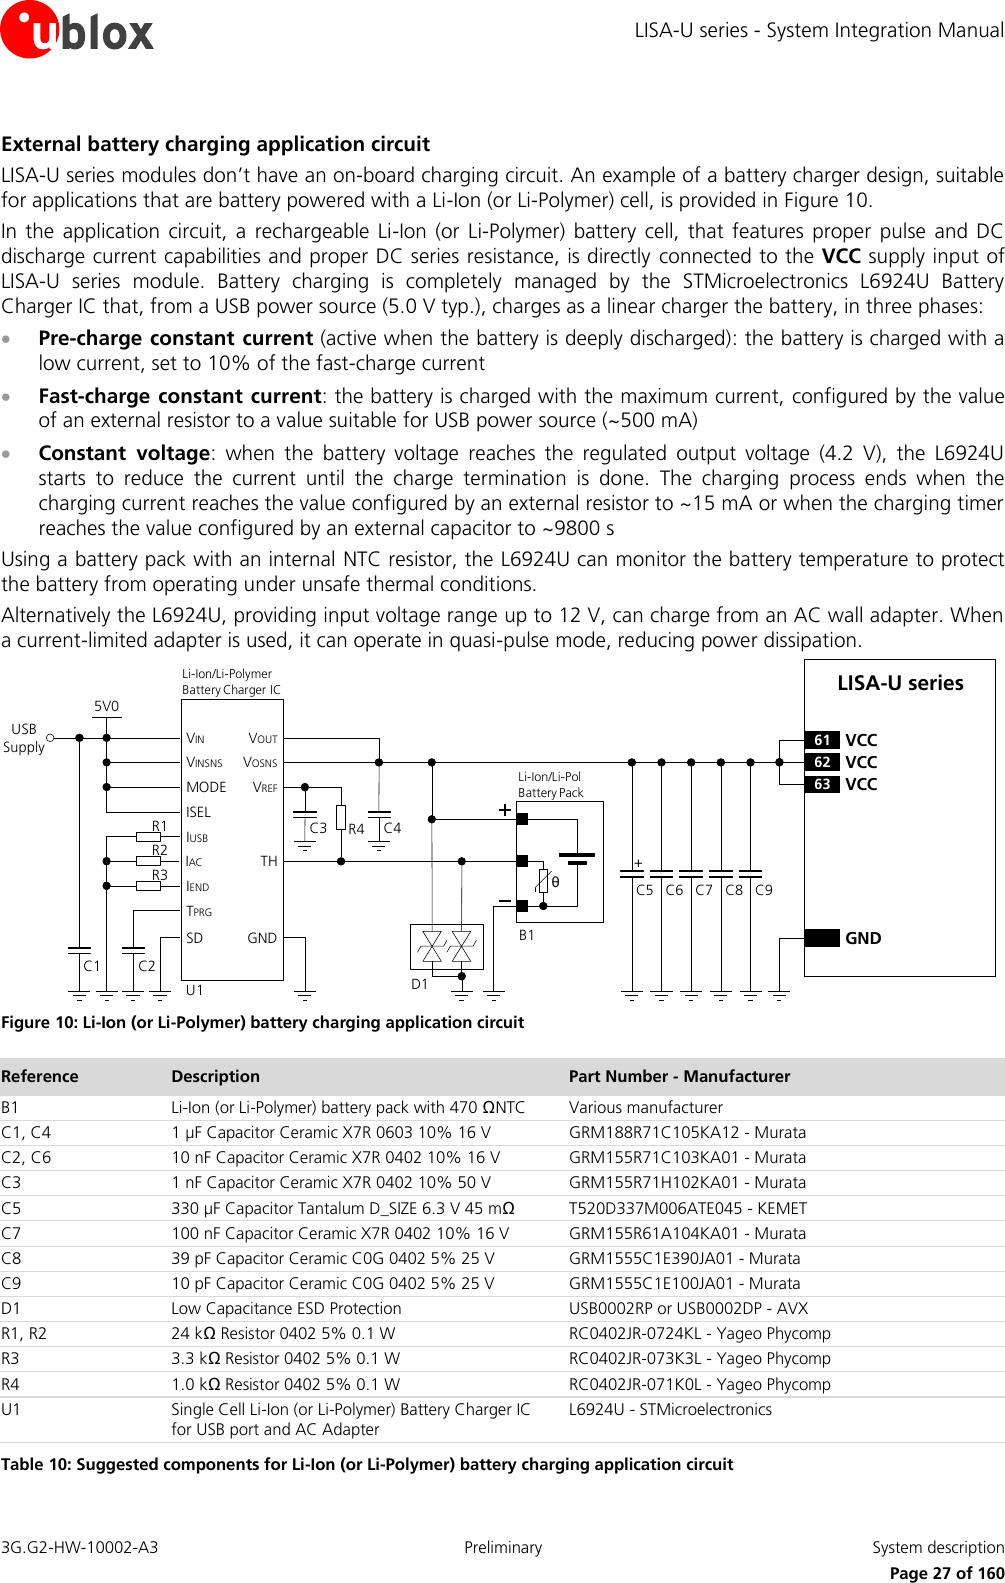 LISA-U series - System Integration Manual 3G.G2-HW-10002-A3  Preliminary  System description      Page 27 of 160 External battery charging application circuit LISA-U series modules don’t have an on-board charging circuit. An example of a battery charger design, suitable for applications that are battery powered with a Li-Ion (or Li-Polymer) cell, is provided in Figure 10. In the  application  circuit,  a  rechargeable  Li-Ion (or  Li-Polymer)  battery  cell,  that features  proper pulse  and  DC discharge current capabilities and proper DC series resistance, is directly  connected to the VCC supply input of LISA-U  series  module.  Battery  charging  is  completely  managed  by  the  STMicroelectronics  L6924U  Battery Charger IC that, from a USB power source (5.0 V typ.), charges as a linear charger the battery, in three phases:  Pre-charge constant current (active when the battery is deeply discharged): the battery is charged with a low current, set to 10% of the fast-charge current  Fast-charge constant current: the battery is charged with the maximum current, configured by the value of an external resistor to a value suitable for USB power source (~500 mA)  Constant  voltage:  when  the  battery  voltage  reaches  the  regulated  output  voltage  (4.2  V),  the  L6924U starts  to  reduce  the  current  until  the  charge  termination  is  done.  The  charging  process  ends  when  the charging current reaches the value configured by an external resistor to ~15 mA or when the charging timer reaches the value configured by an external capacitor to ~9800 s Using a battery pack with an internal NTC resistor, the L6924U can monitor the battery temperature to protect the battery from operating under unsafe thermal conditions. Alternatively the L6924U, providing input voltage range up to 12 V, can charge from an AC wall adapter. When a current-limited adapter is used, it can operate in quasi-pulse mode, reducing power dissipation. C5 C8GNDC7C6 C9LISA-U series62 VCC63 VCC61 VCC+USB SupplyC3 R4θU1IUSBIACIENDTPRGSDVINVINSNSMODEISELC2C15V0THGNDVOUTVOSNSVREFR1R2R3Li-Ion/Li-Pol Battery PackD1B1C4Li-Ion/Li-Polymer    Battery Charger IC Figure 10: Li-Ion (or Li-Polymer) battery charging application circuit Reference Description Part Number - Manufacturer B1 Li-Ion (or Li-Polymer) battery pack with 470 Ω NTC Various manufacturer C1, C4 1 µF Capacitor Ceramic X7R 0603 10% 16 V GRM188R71C105KA12 - Murata C2, C6 10 nF Capacitor Ceramic X7R 0402 10% 16 V GRM155R71C103KA01 - Murata C3 1 nF Capacitor Ceramic X7R 0402 10% 50 V GRM155R71H102KA01 - Murata C5 330 µF Capacitor Tantalum D_SIZE 6.3 V 45 mΩ T520D337M006ATE045 - KEMET C7 100 nF Capacitor Ceramic X7R 0402 10% 16 V GRM155R61A104KA01 - Murata C8 39 pF Capacitor Ceramic C0G 0402 5% 25 V GRM1555C1E390JA01 - Murata C9 10 pF Capacitor Ceramic C0G 0402 5% 25 V GRM1555C1E100JA01 - Murata D1 Low Capacitance ESD Protection USB0002RP or USB0002DP - AVX R1, R2 24 kΩ Resistor 0402 5% 0.1 W RC0402JR-0724KL - Yageo Phycomp R3 3.3 kΩ Resistor 0402 5% 0.1 W RC0402JR-073K3L - Yageo Phycomp R4 1.0 kΩ Resistor 0402 5% 0.1 W RC0402JR-071K0L - Yageo Phycomp U1 Single Cell Li-Ion (or Li-Polymer) Battery Charger IC for USB port and AC Adapter L6924U - STMicroelectronics Table 10: Suggested components for Li-Ion (or Li-Polymer) battery charging application circuit  